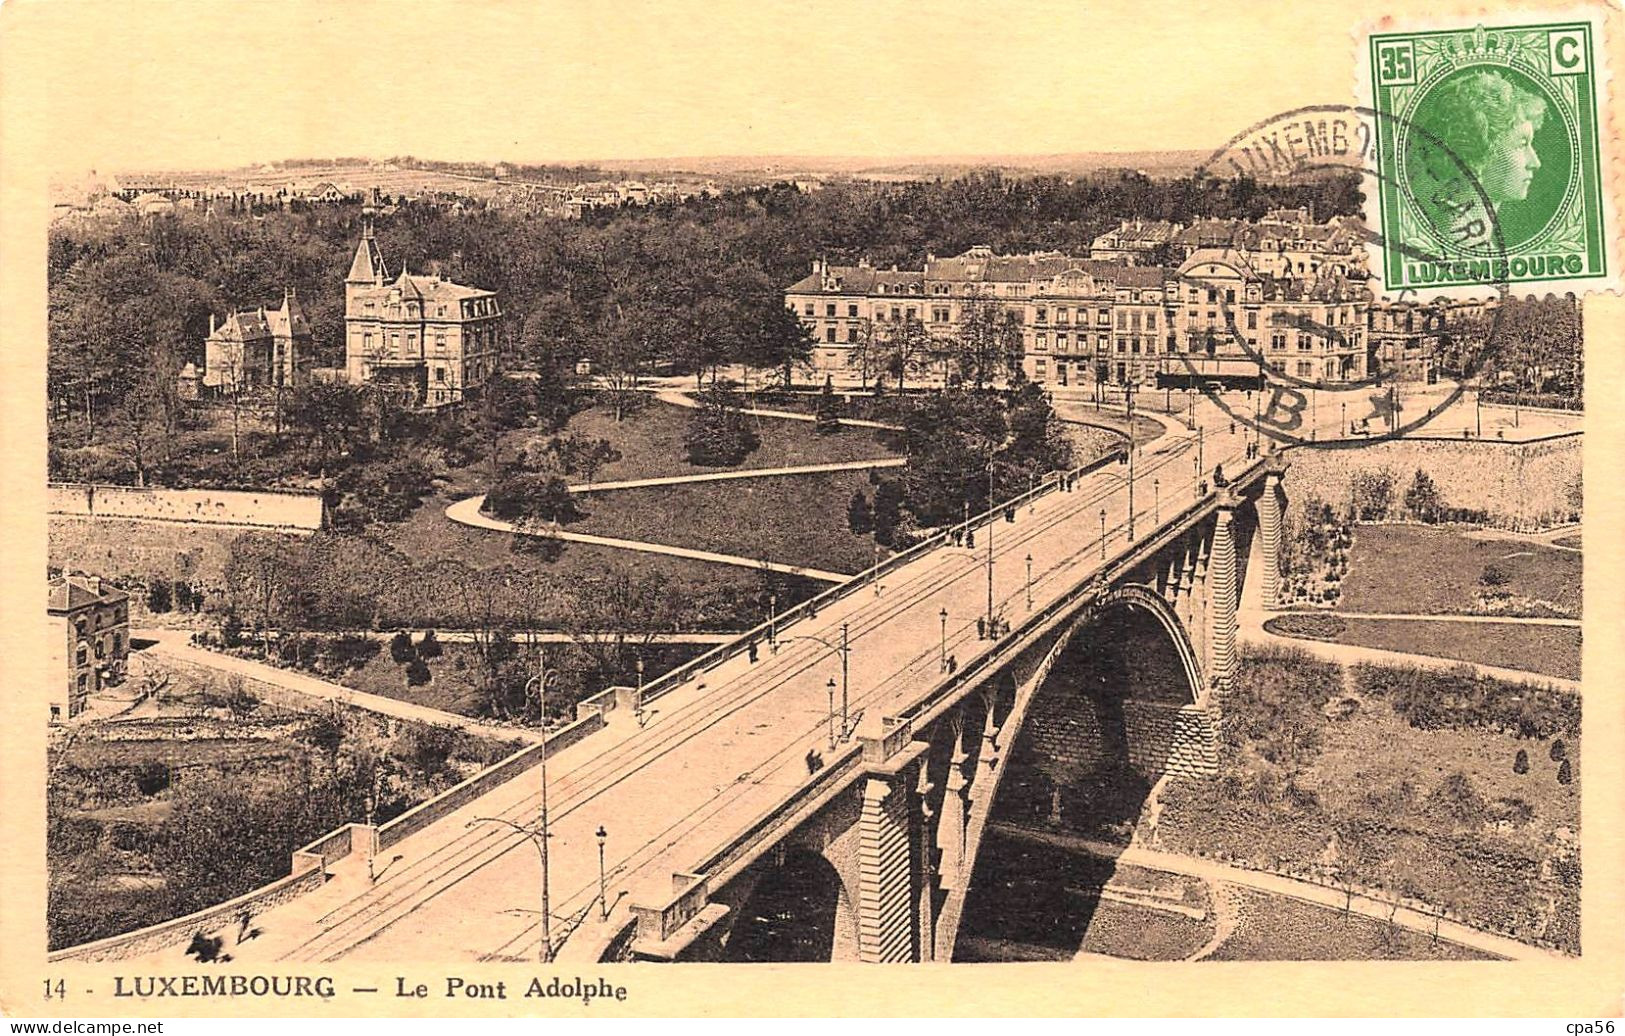 Le PONT ADOLPHE - LUXEMBOURG - Cachet LUXEMBOURG GARE B - Luxemburg - Stad